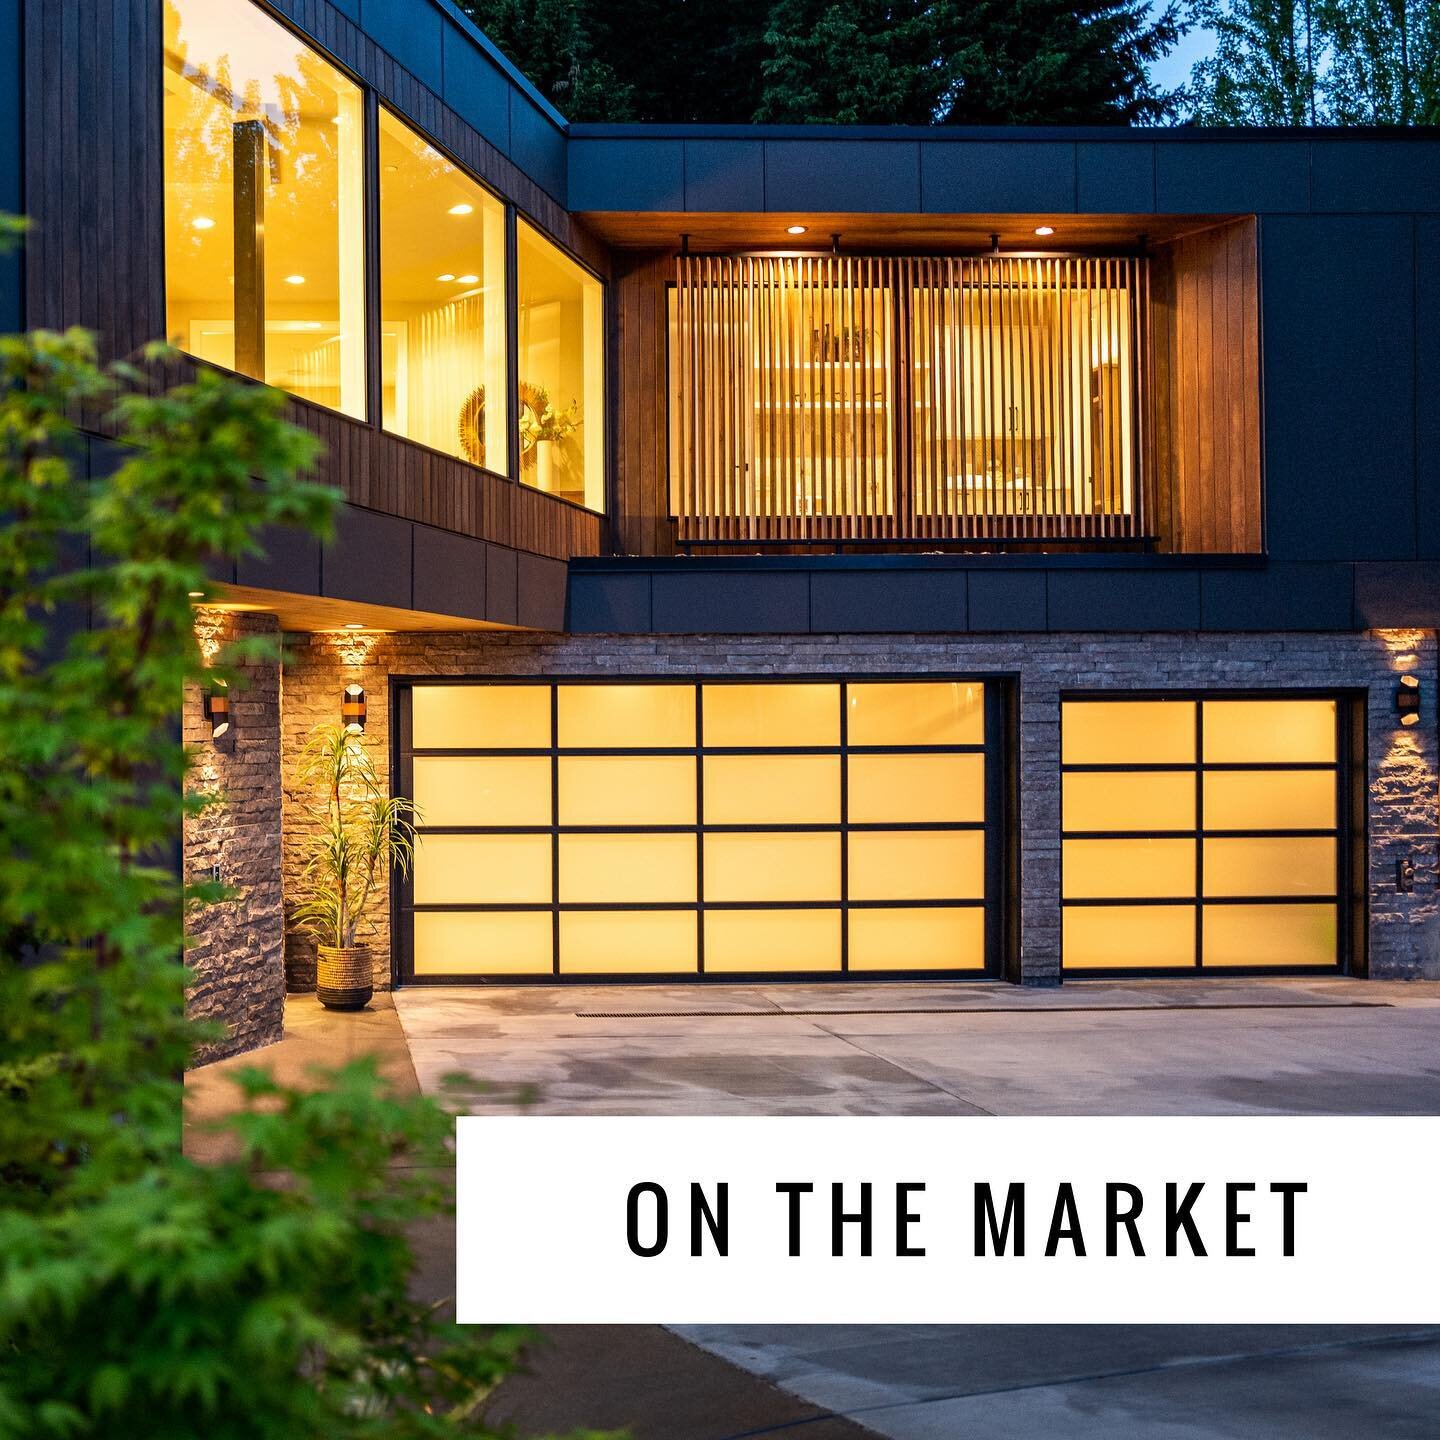 Oak &amp; Iron House is on the market. Brokers Open House this Thursday 11:30-1:30. Public Open House Friday 5-7 and Saturday/Sunday 1-4. #modernhomes #openhouse #medinawashington #houseonthemarket #forsale